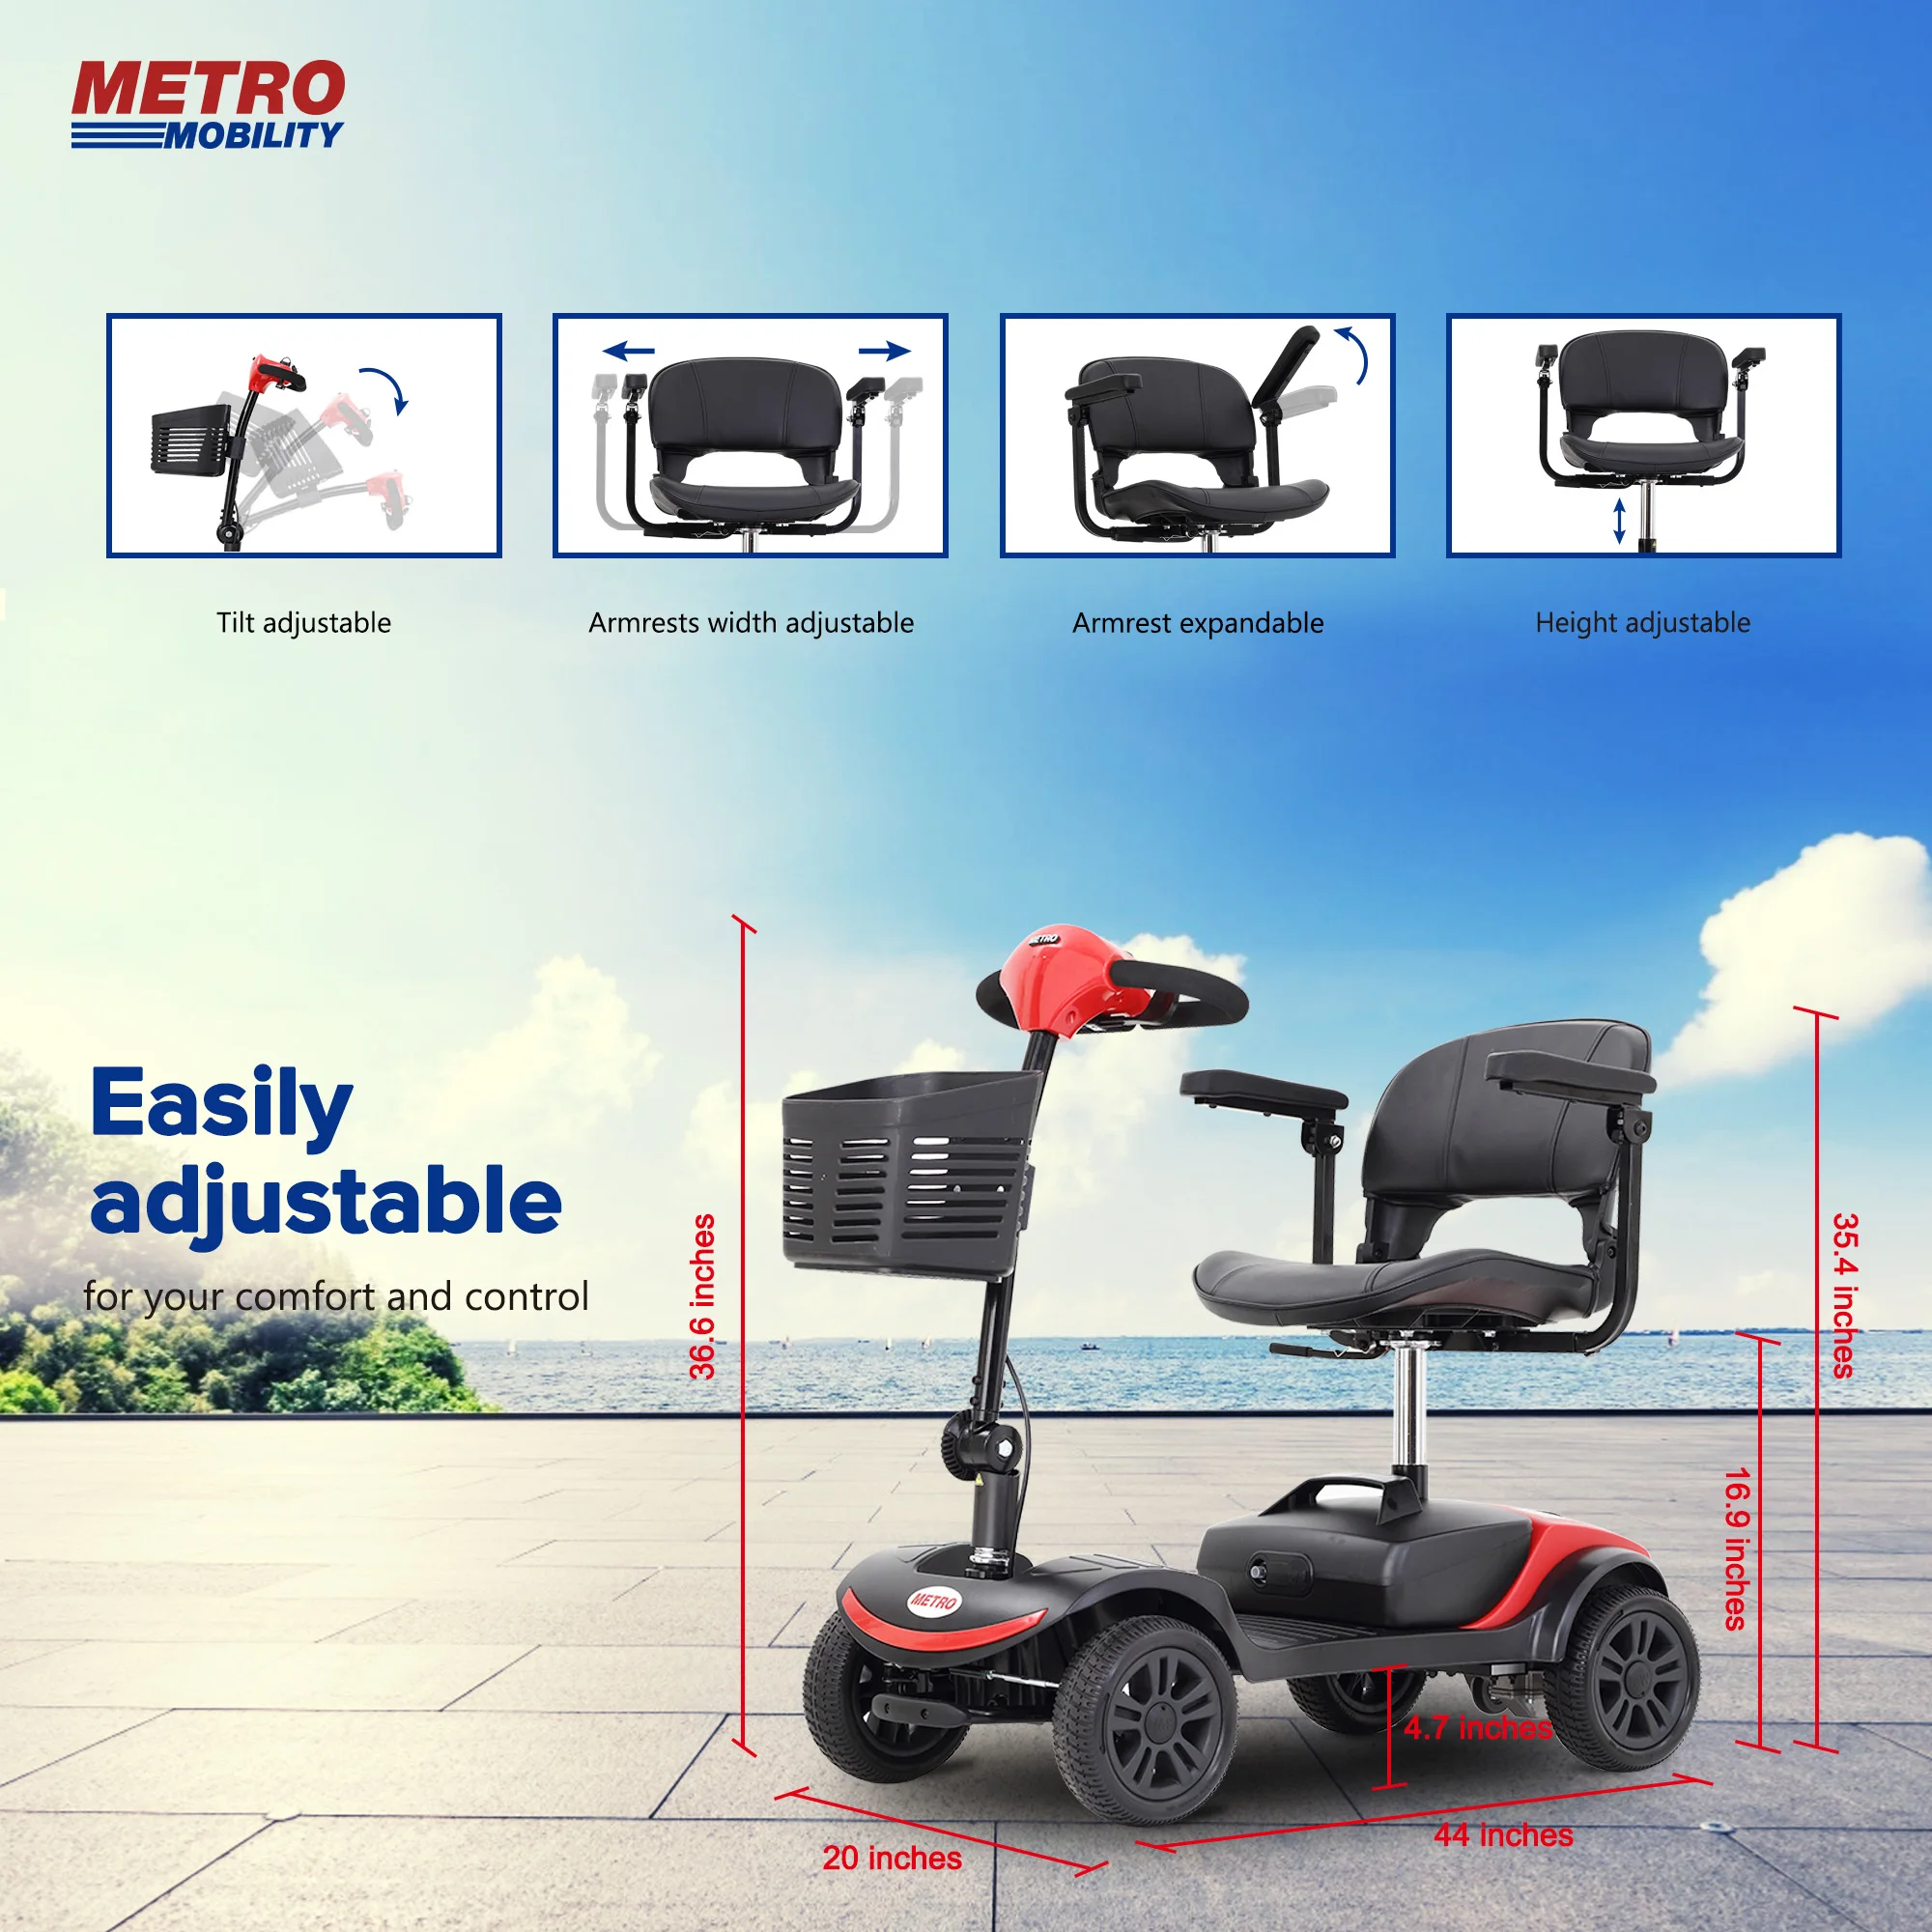 

Electric 4 Wheel Compact Mobility Scooter Car motorcycle Fold Power Swivel Seat For Elderly Adults Seniors Travel outdoor sport